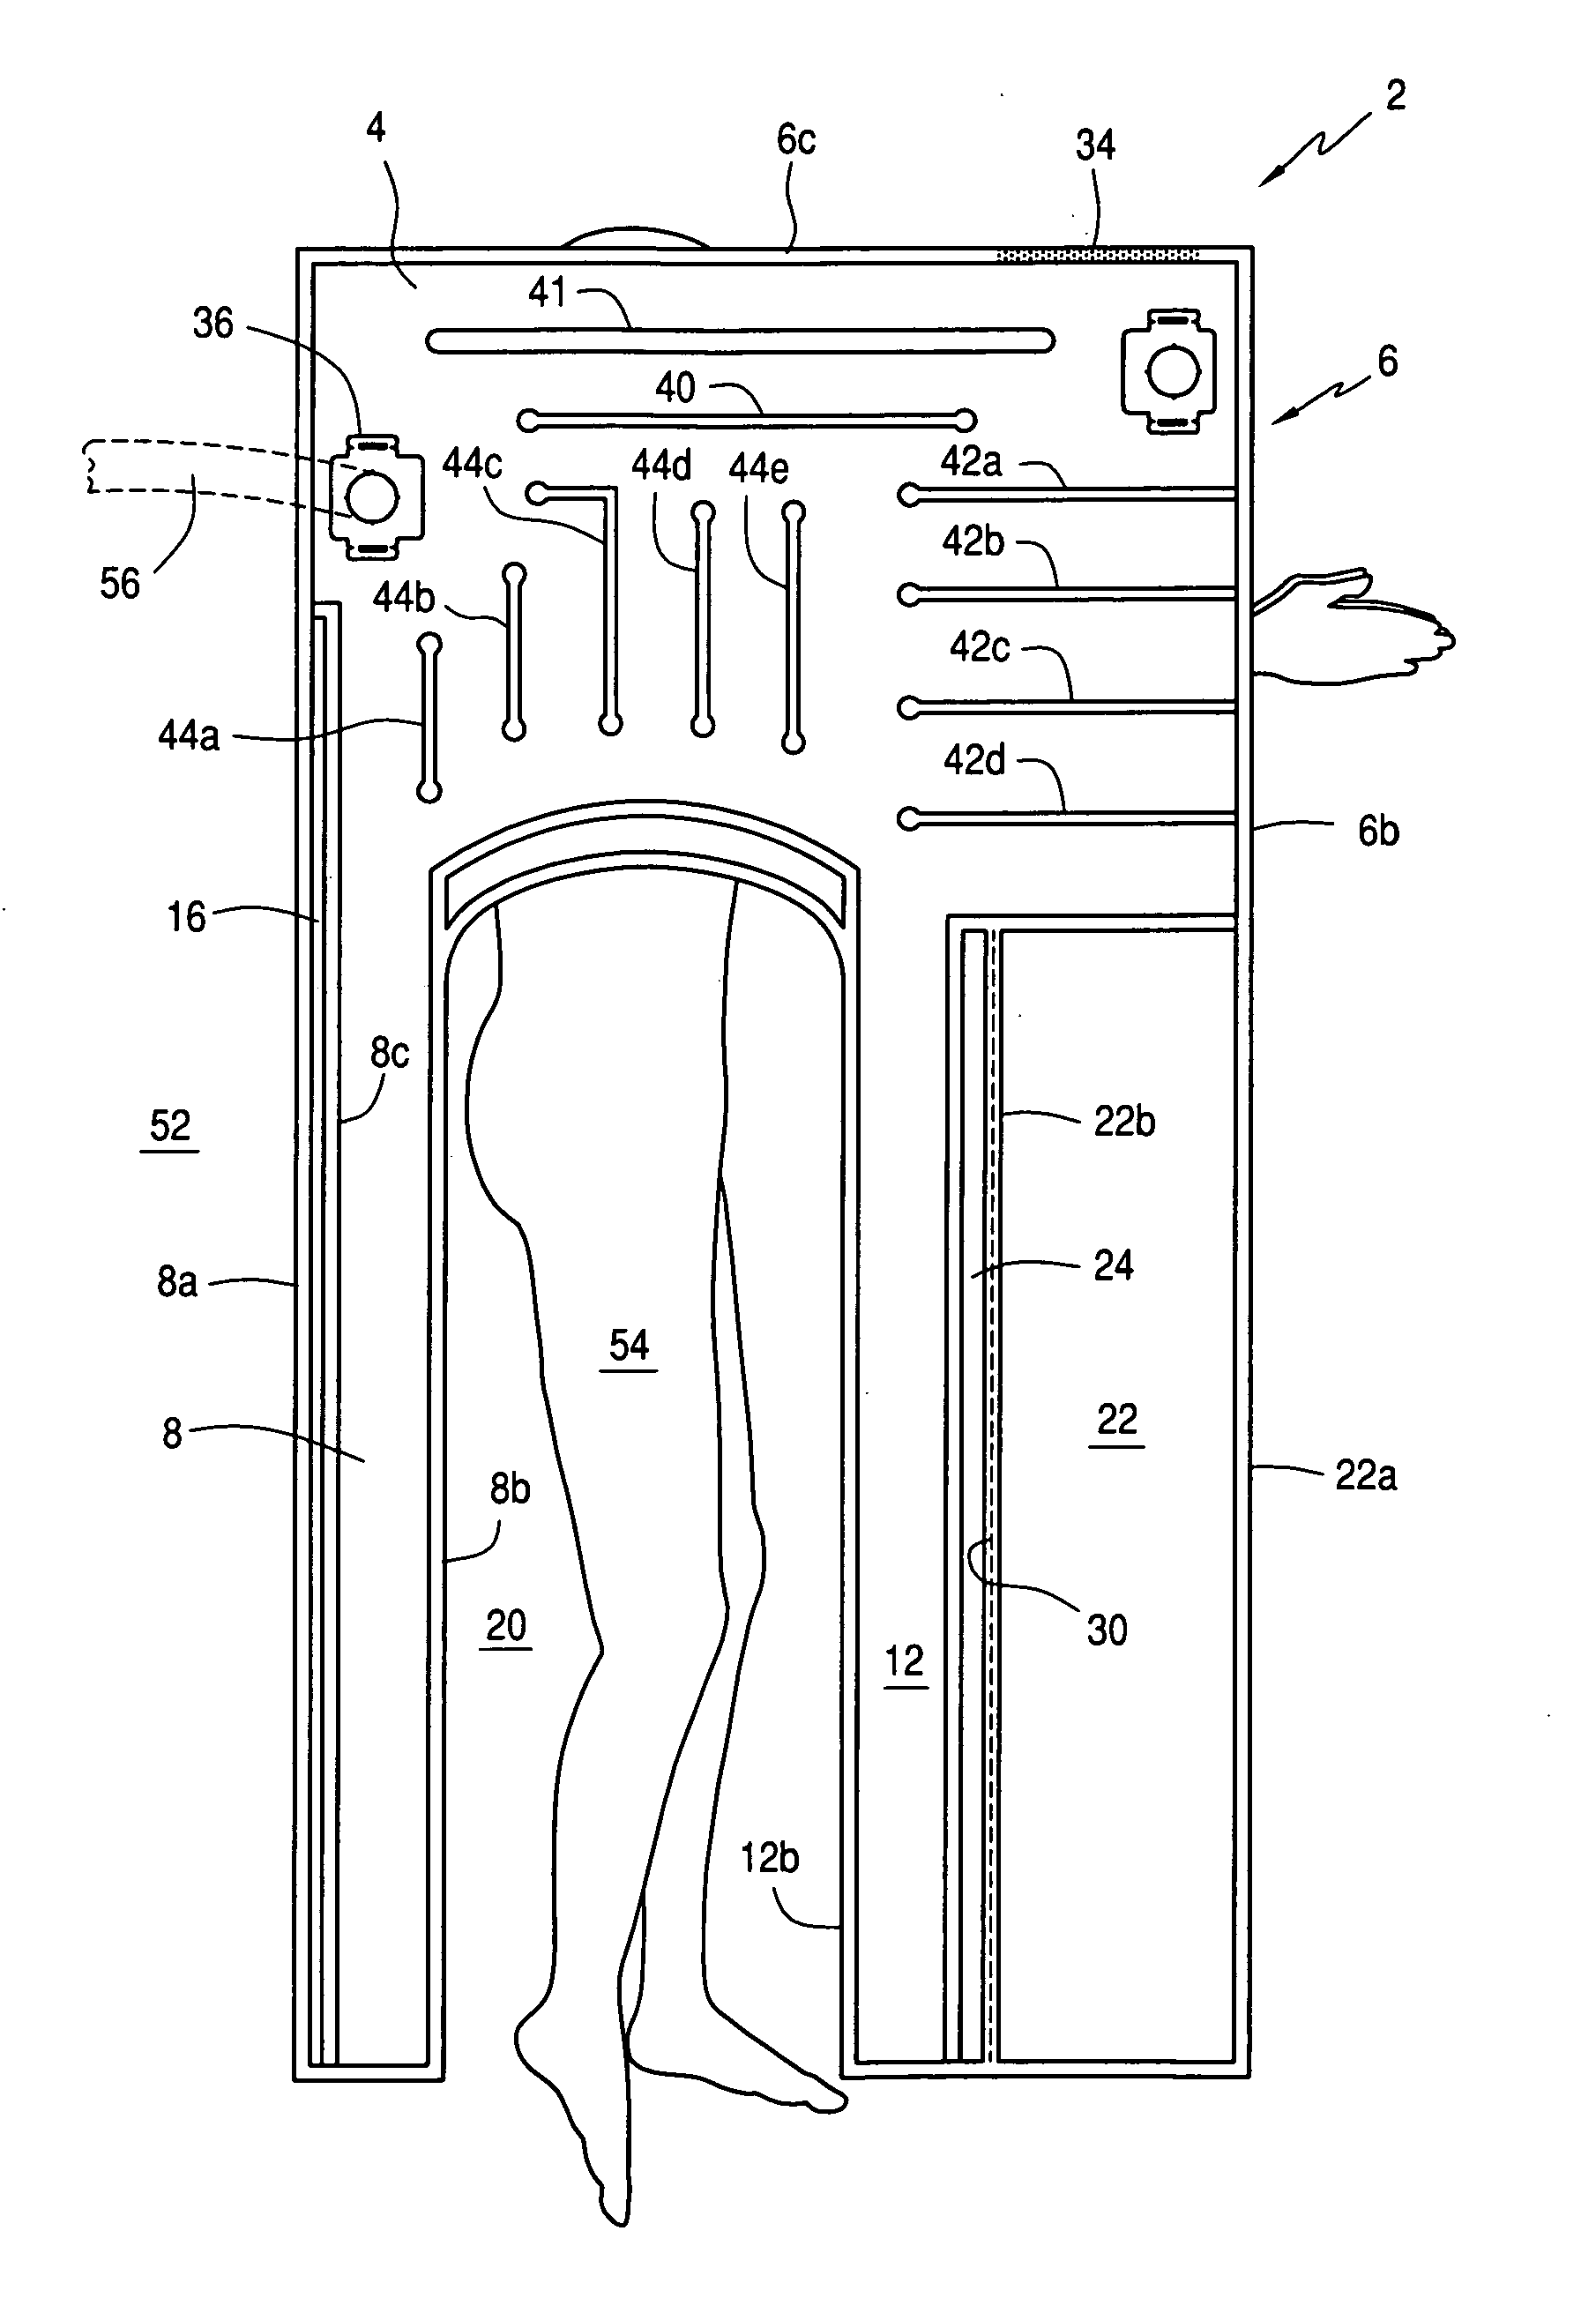 Lateral access blanket